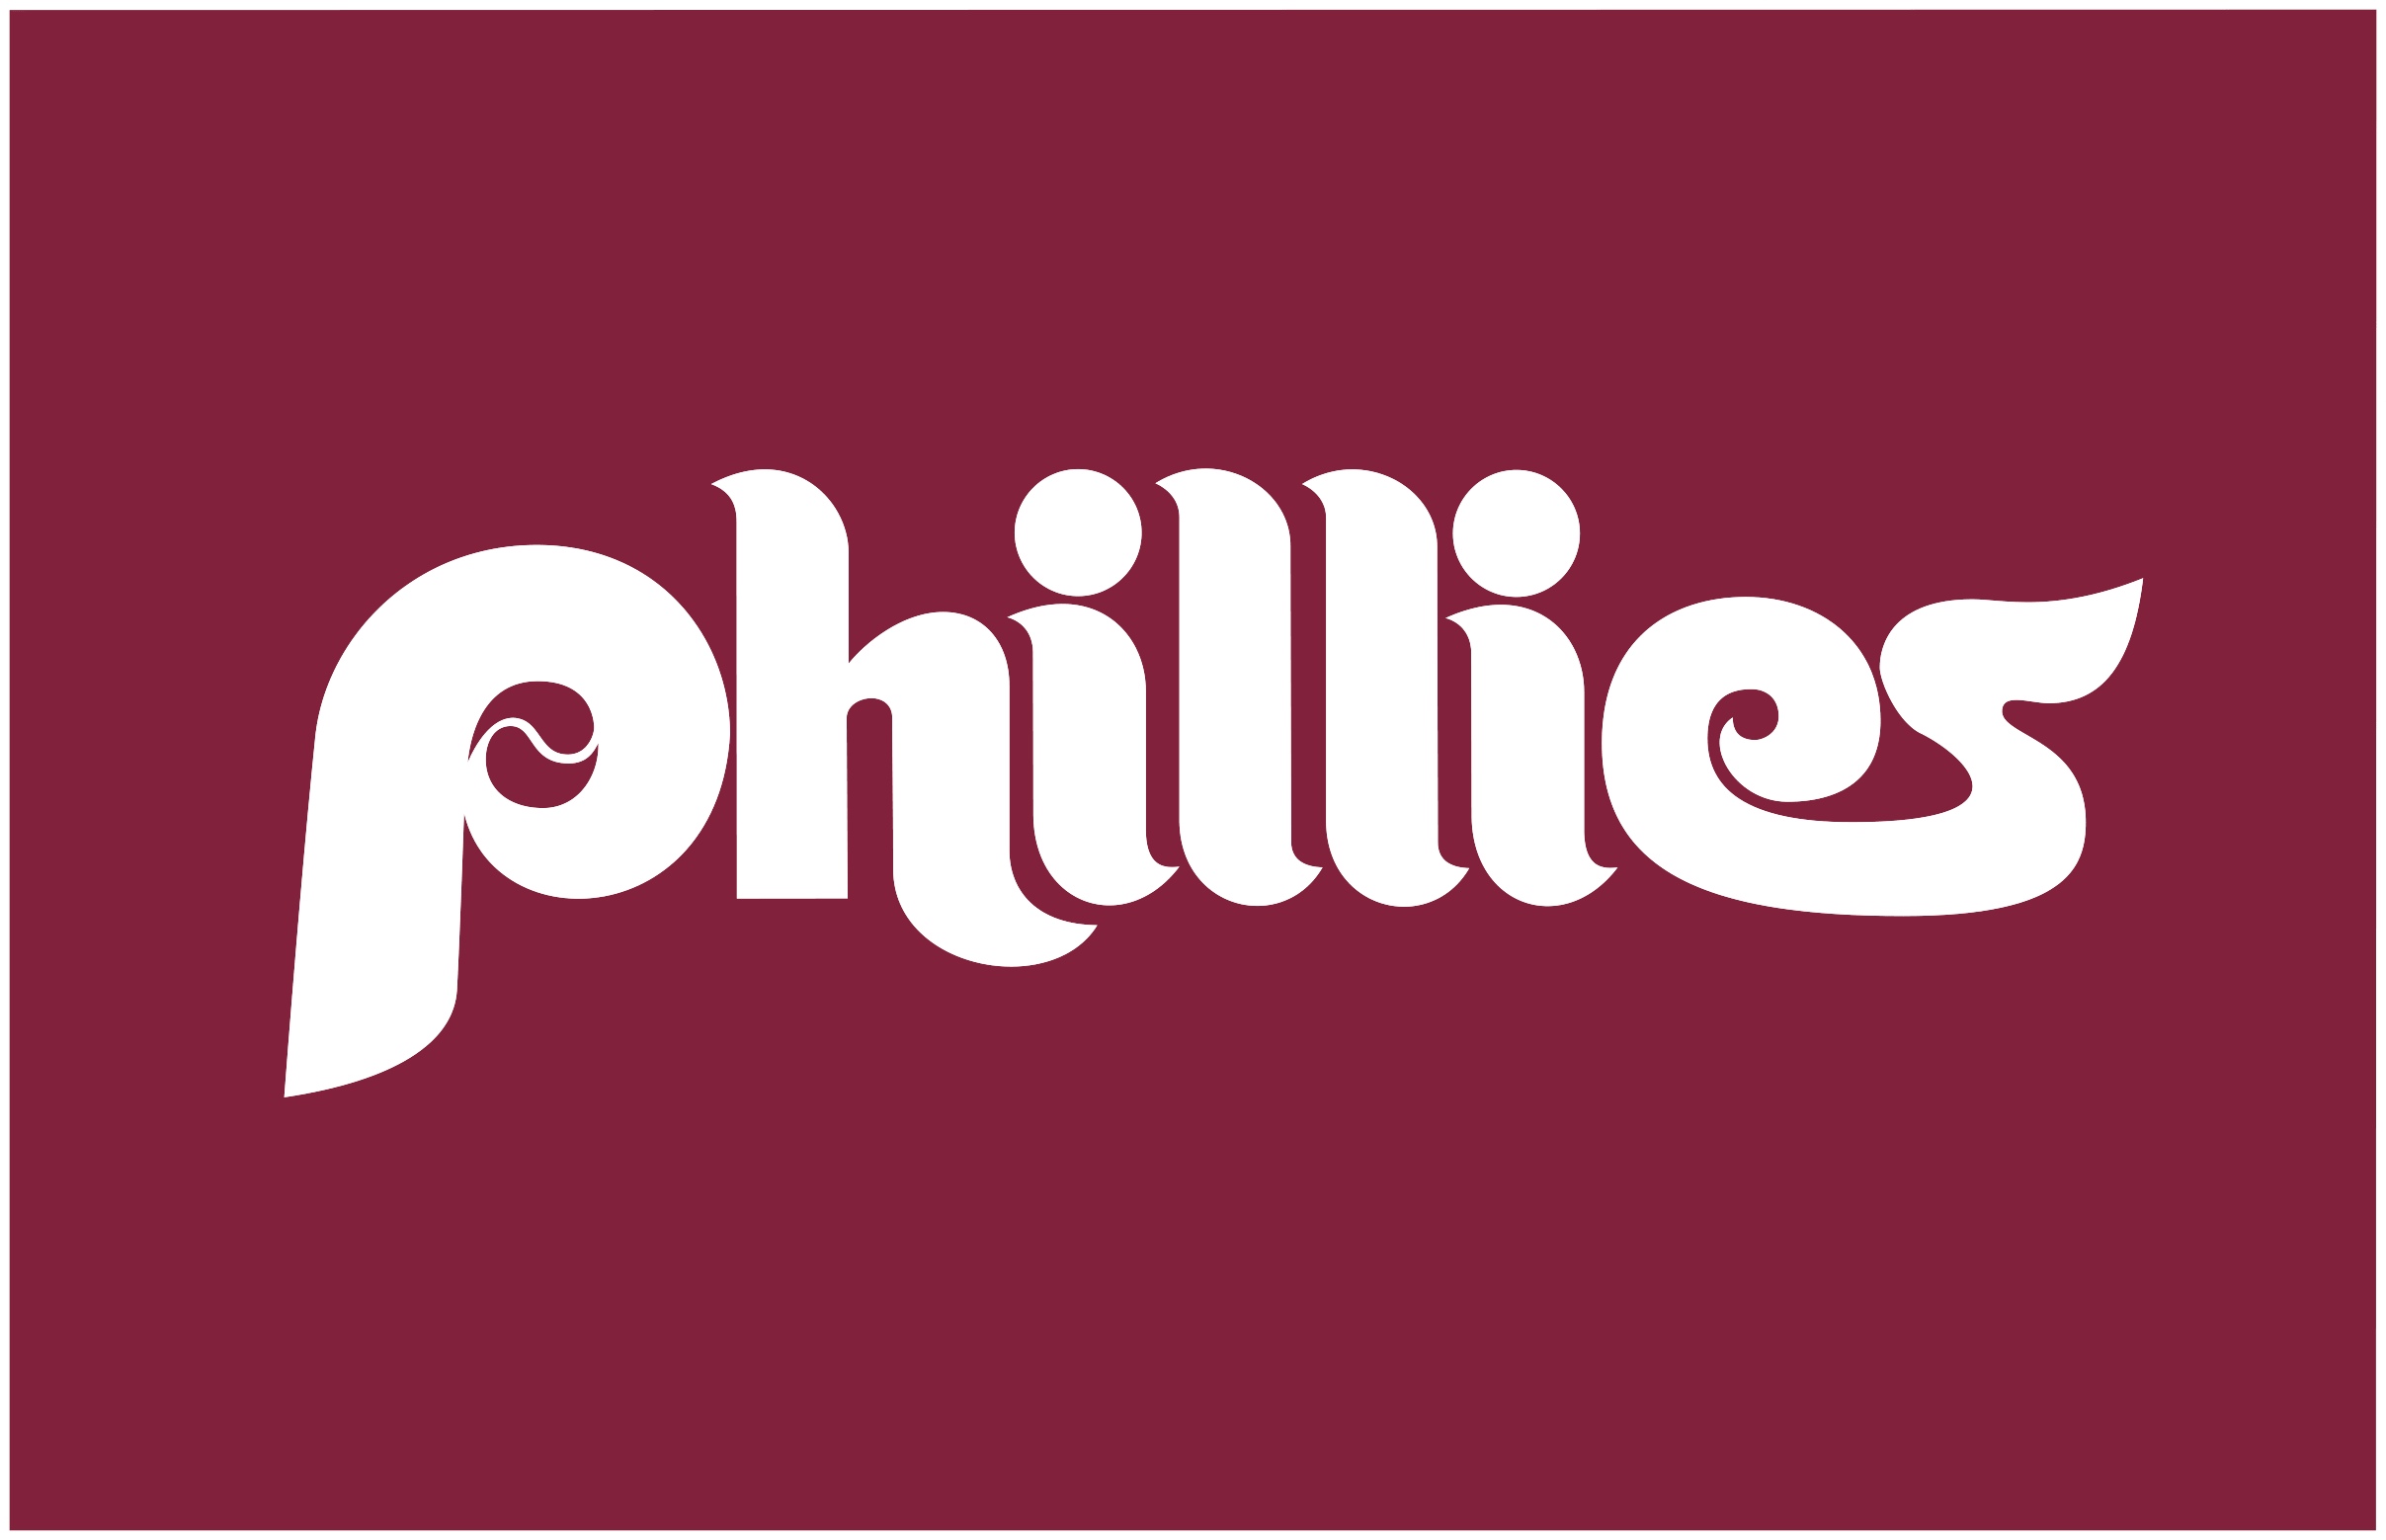 Phillies SVG, Baseball SVG, Phillies Wavy SVG, Digital Download, Cut File,  Sublimation, Clipart (includes svg/dxf/png/jpeg files)